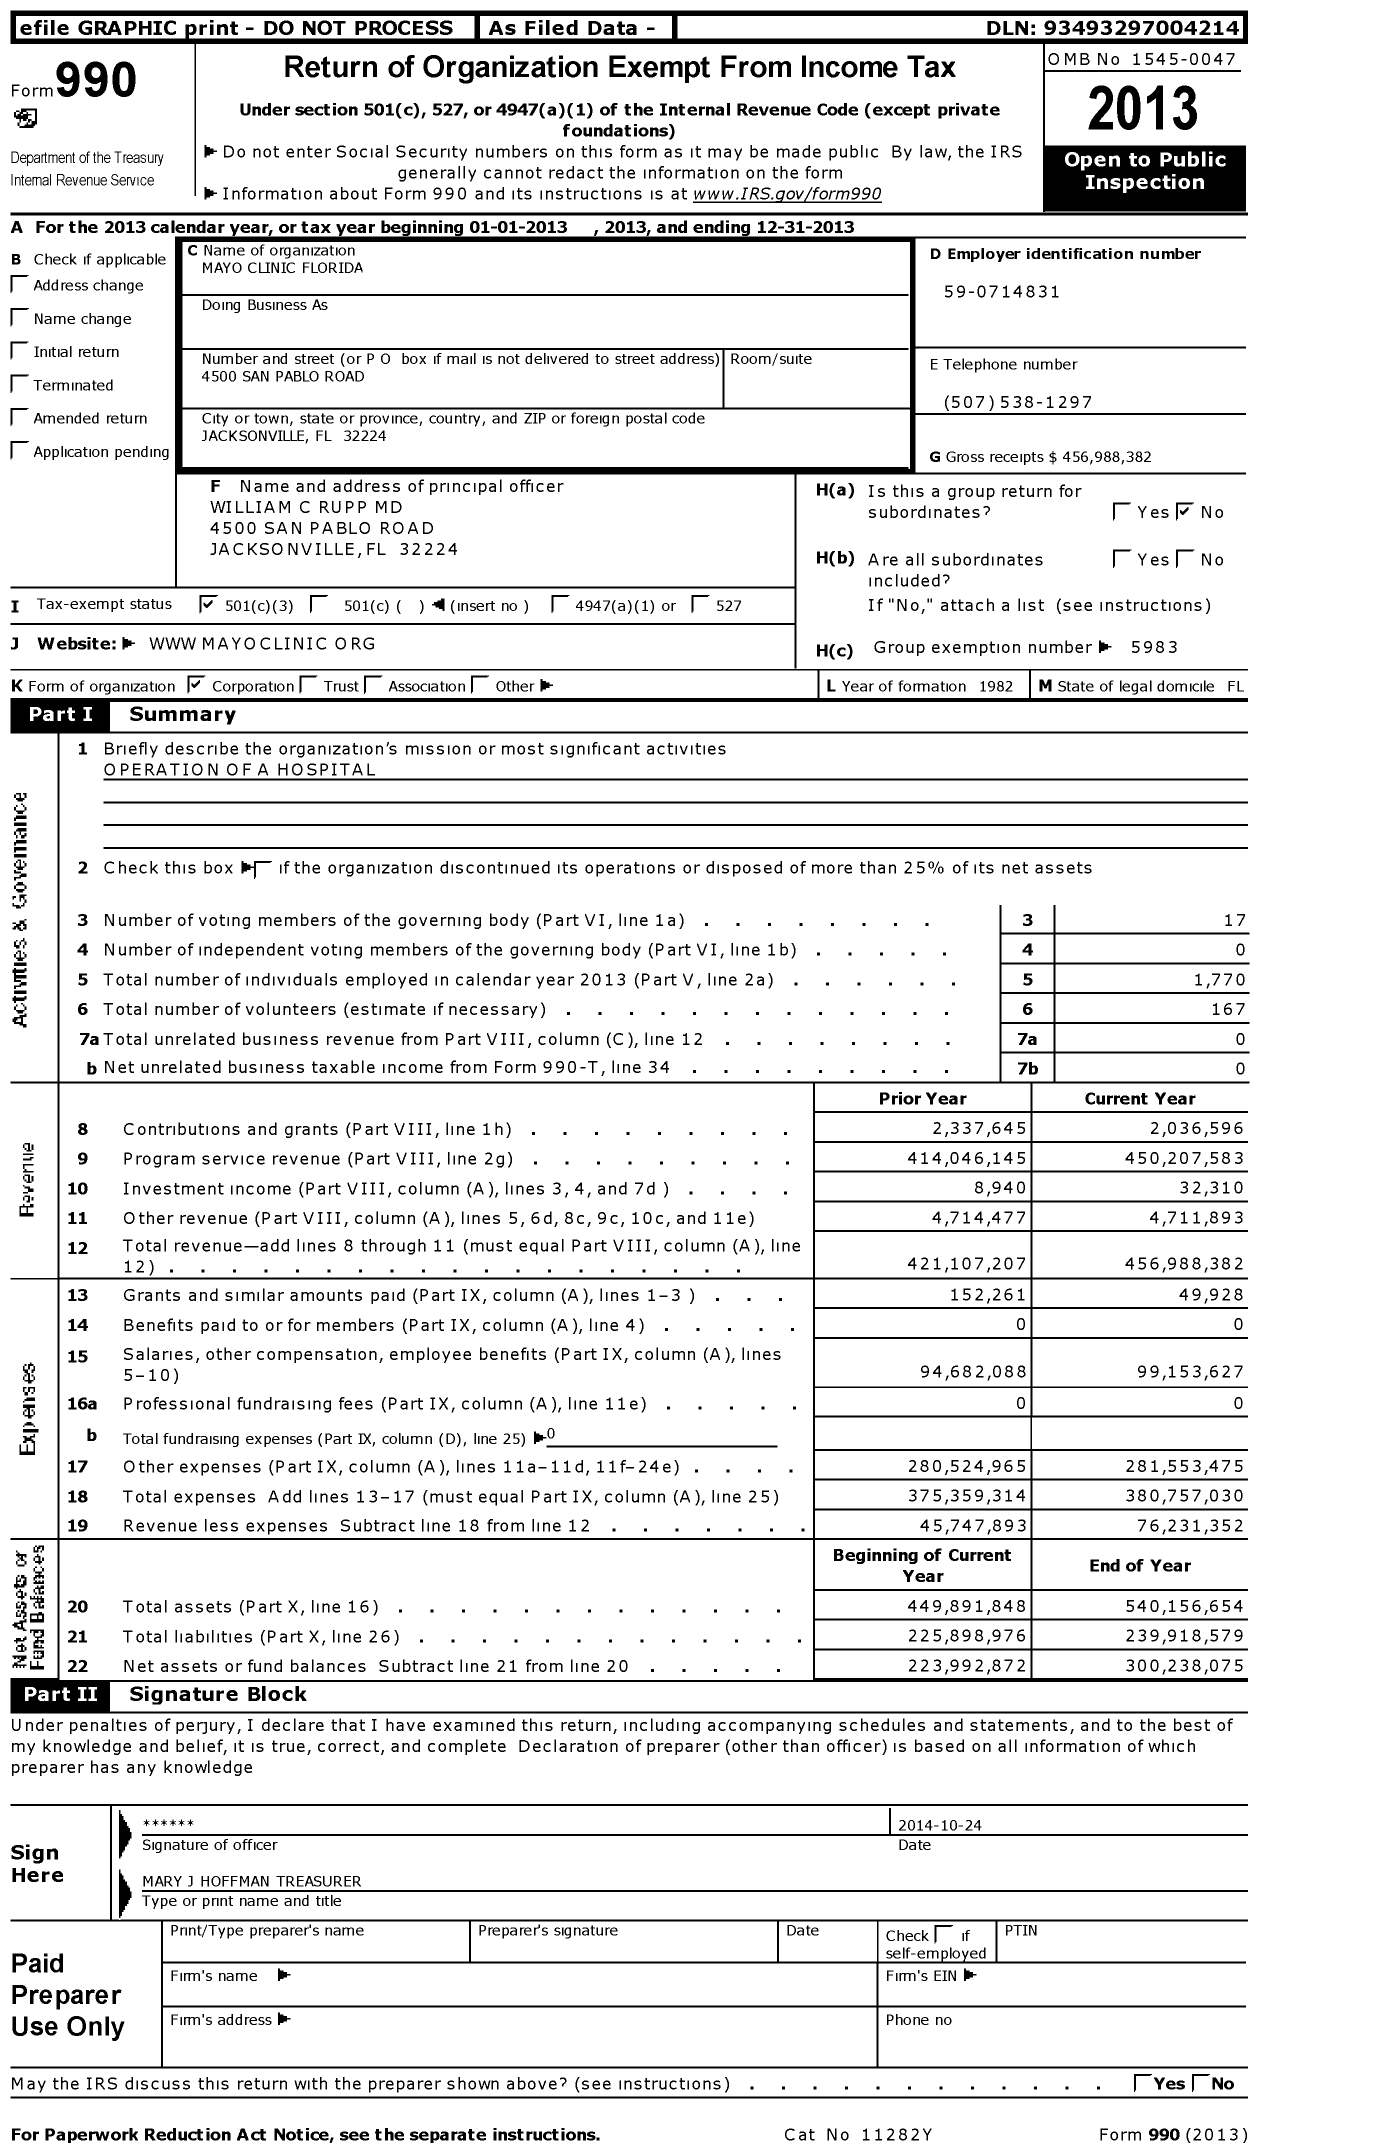 Image of first page of 2013 Form 990 for Mayo Clinic Florida (MCF)